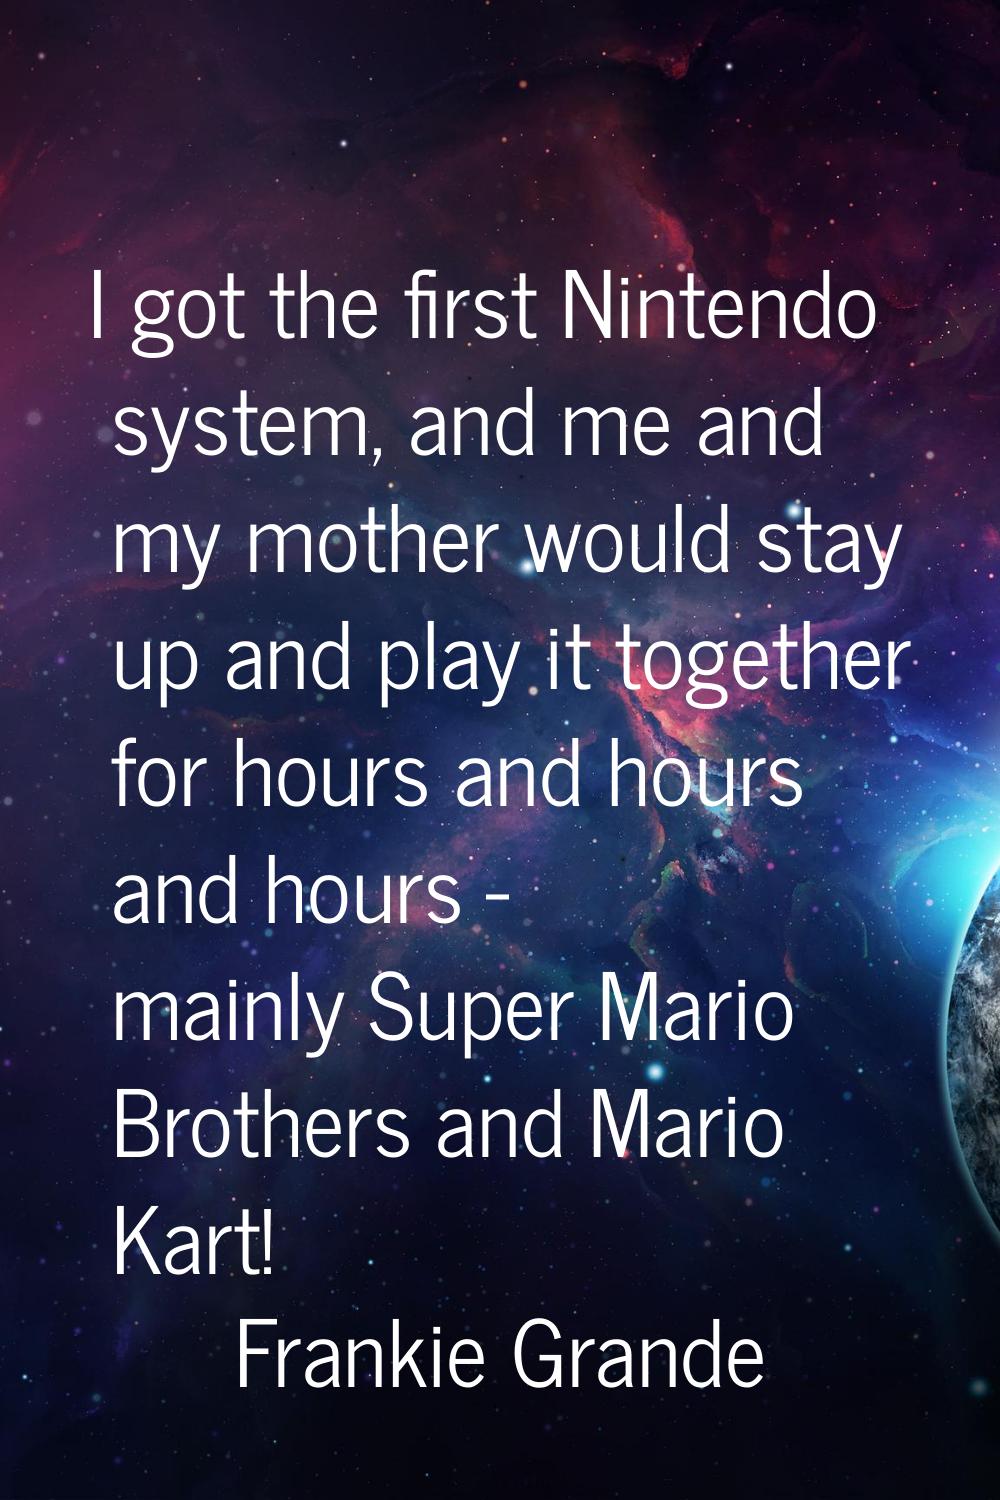 I got the first Nintendo system, and me and my mother would stay up and play it together for hours 